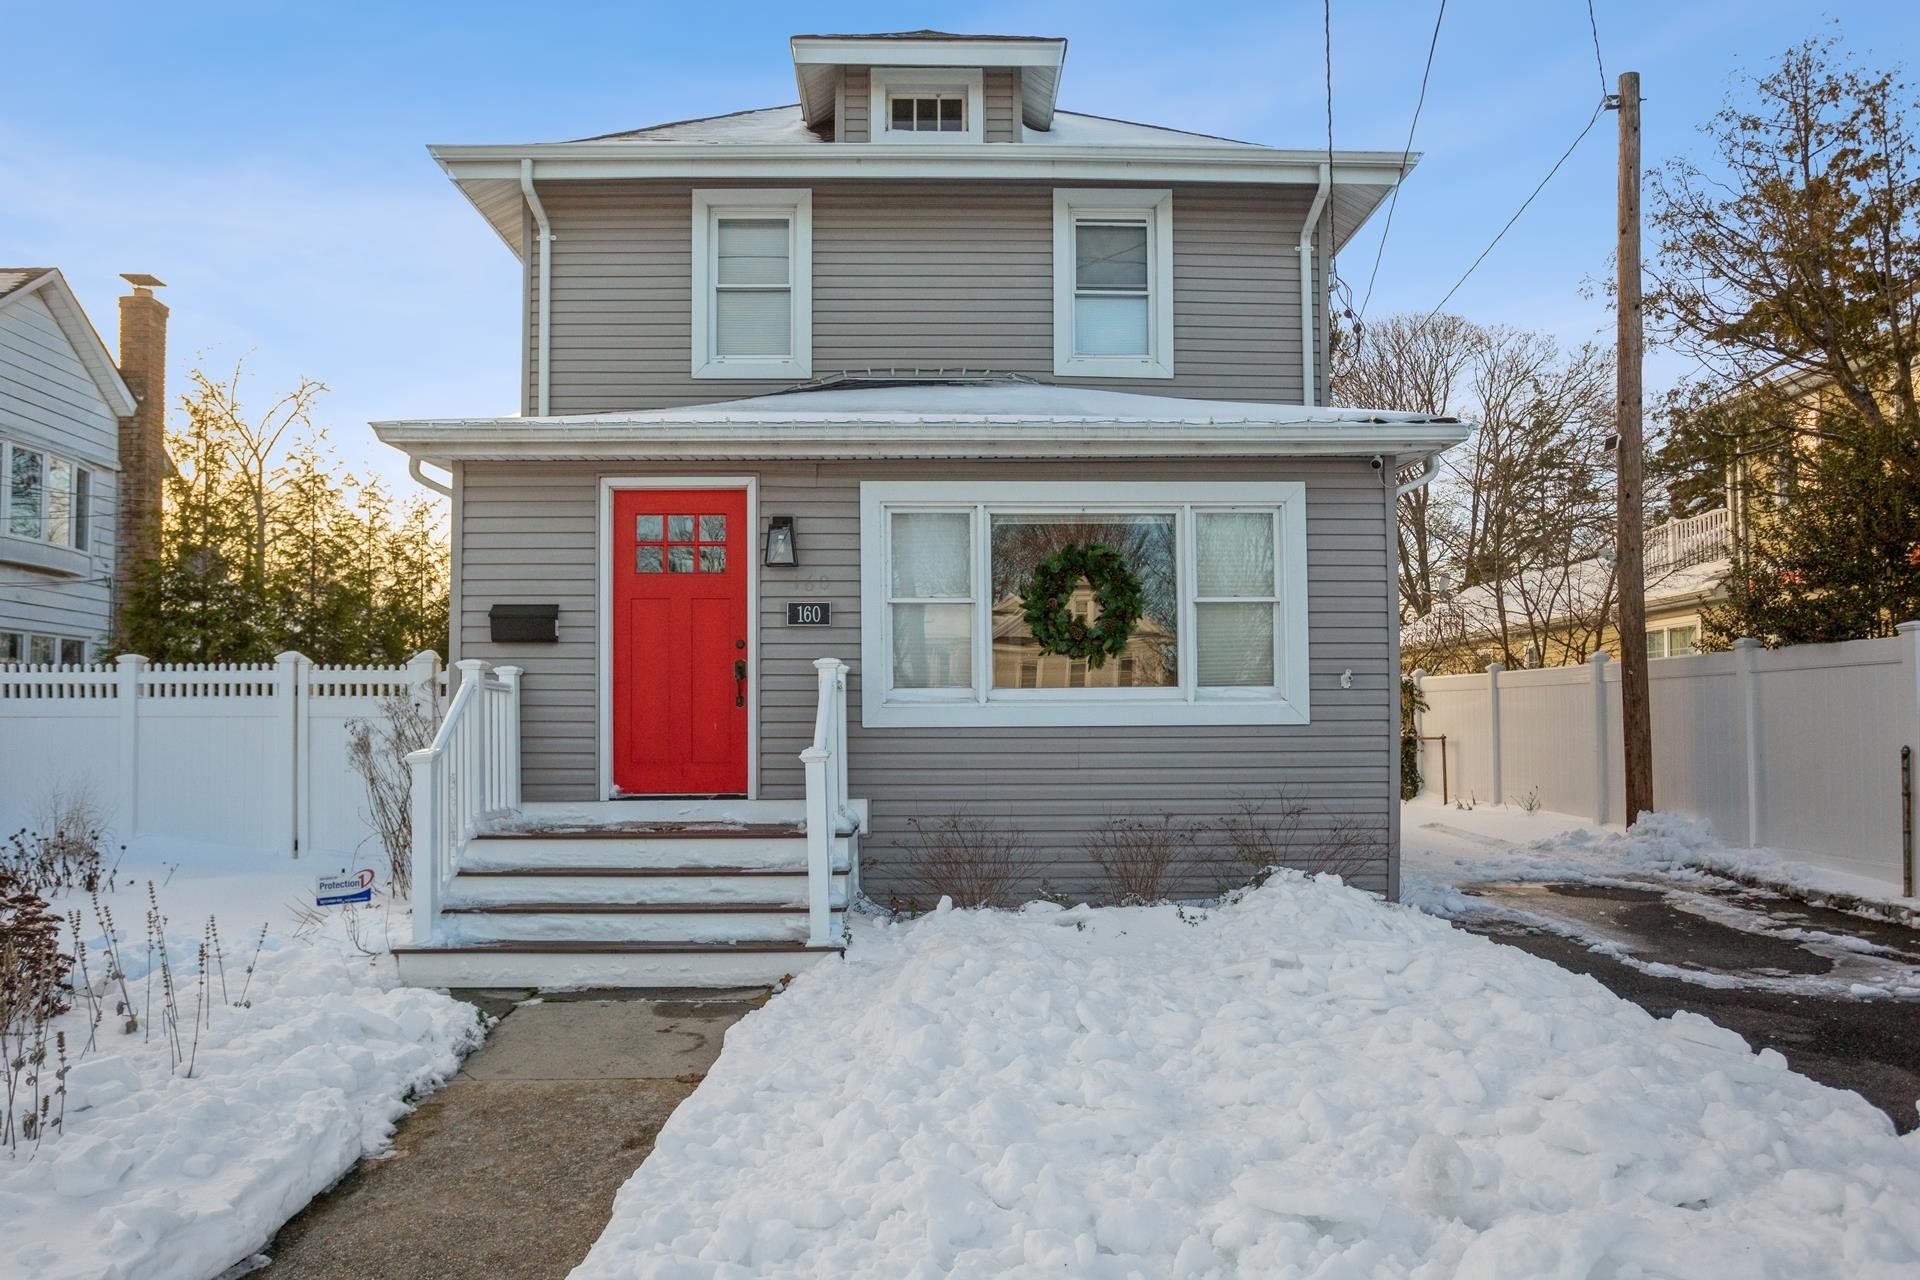 Single Family Home at Patchogue